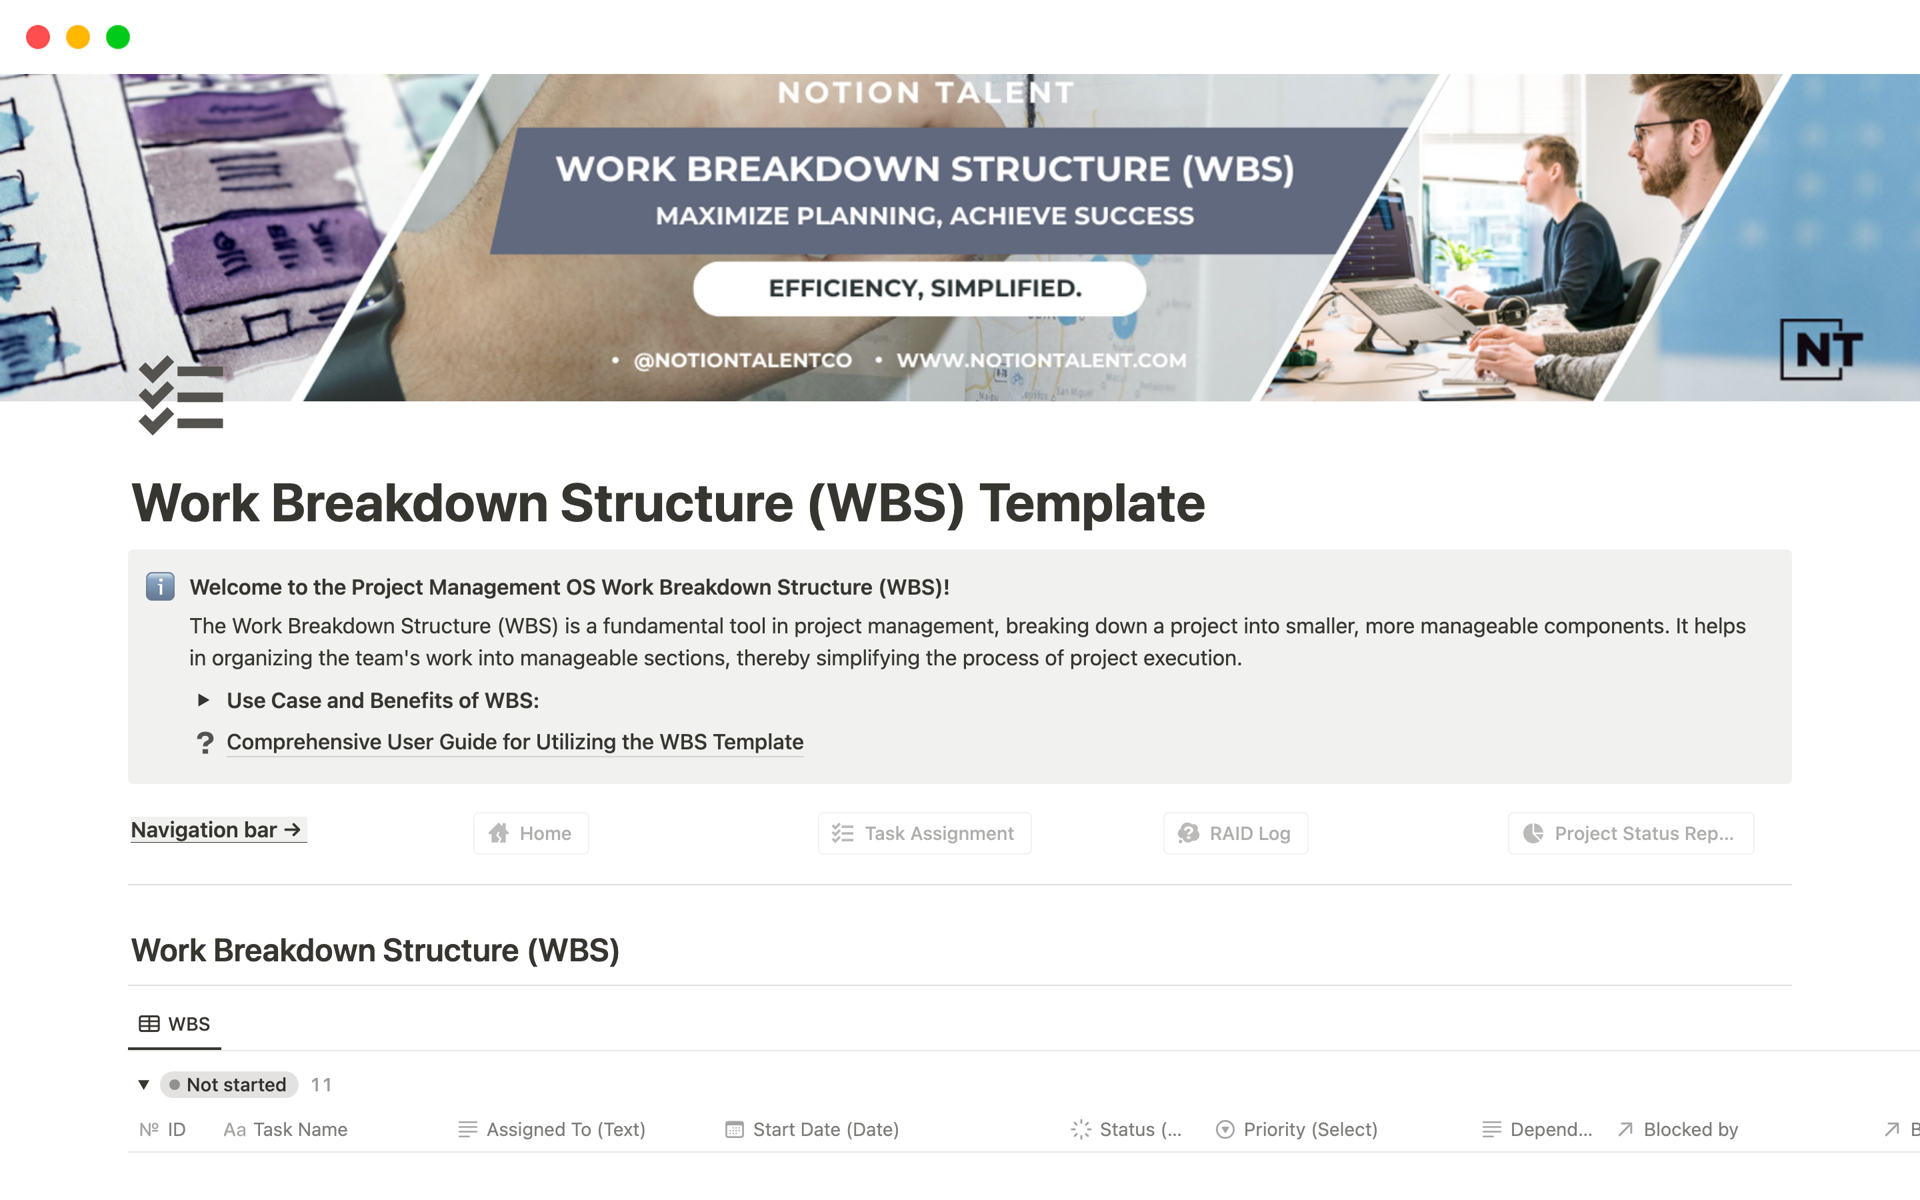 Simplify complex projects with the Notion Work Breakdown Structure (WBS) Template, a tool designed to break down projects into manageable tasks. This template is perfect for visualizing project scope and ensuring thorough planning and execution.